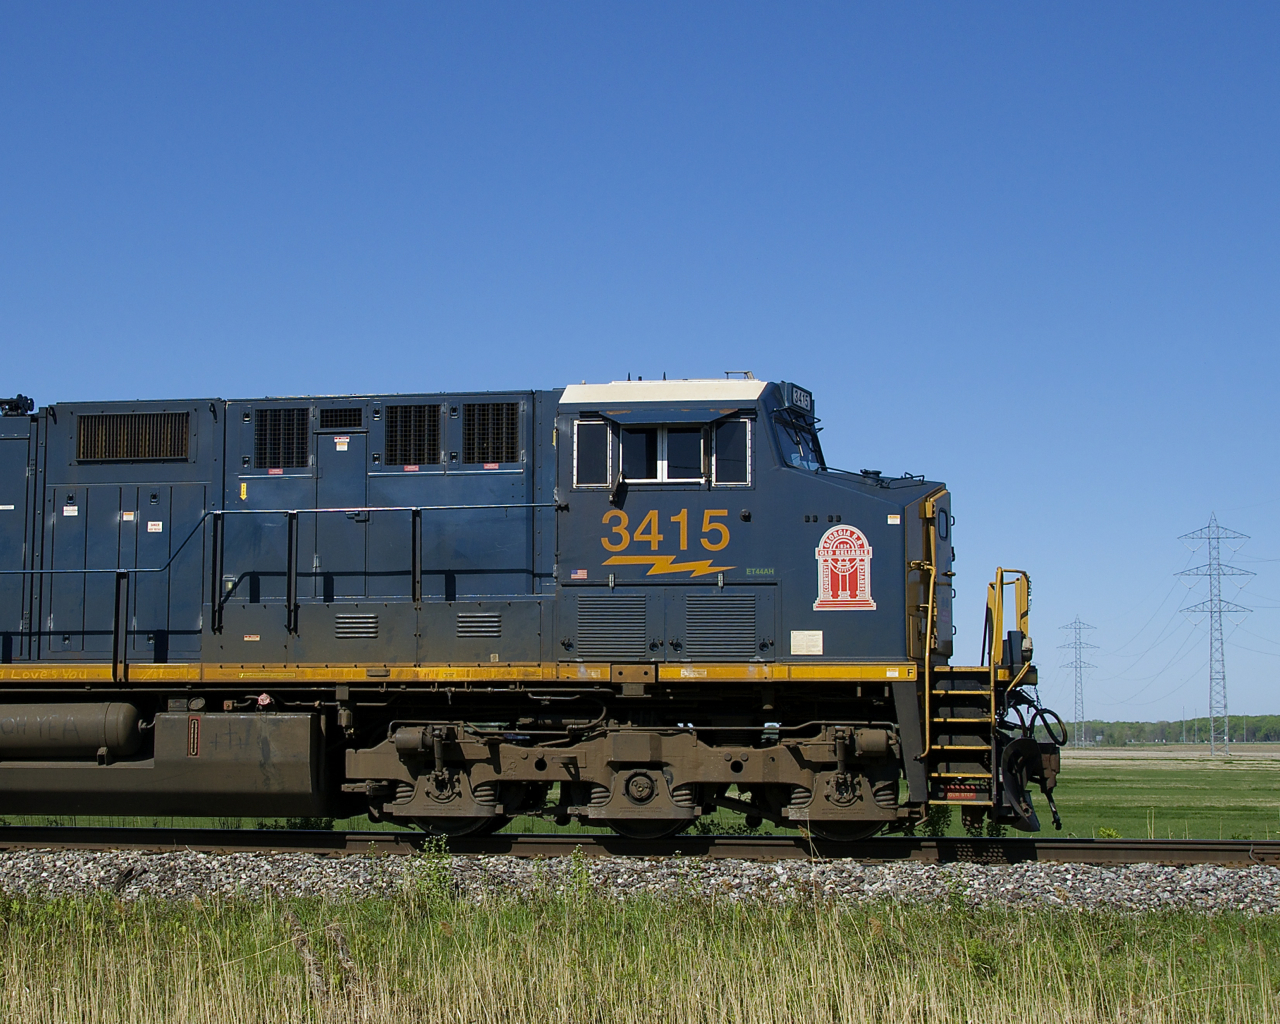 The leader on CN 327 (CSXT 3415) has a decal for CSX predecessor Georgia Railroad as it heads south on the wye leading from the Kingston Sub to the Valleyfield Sub.